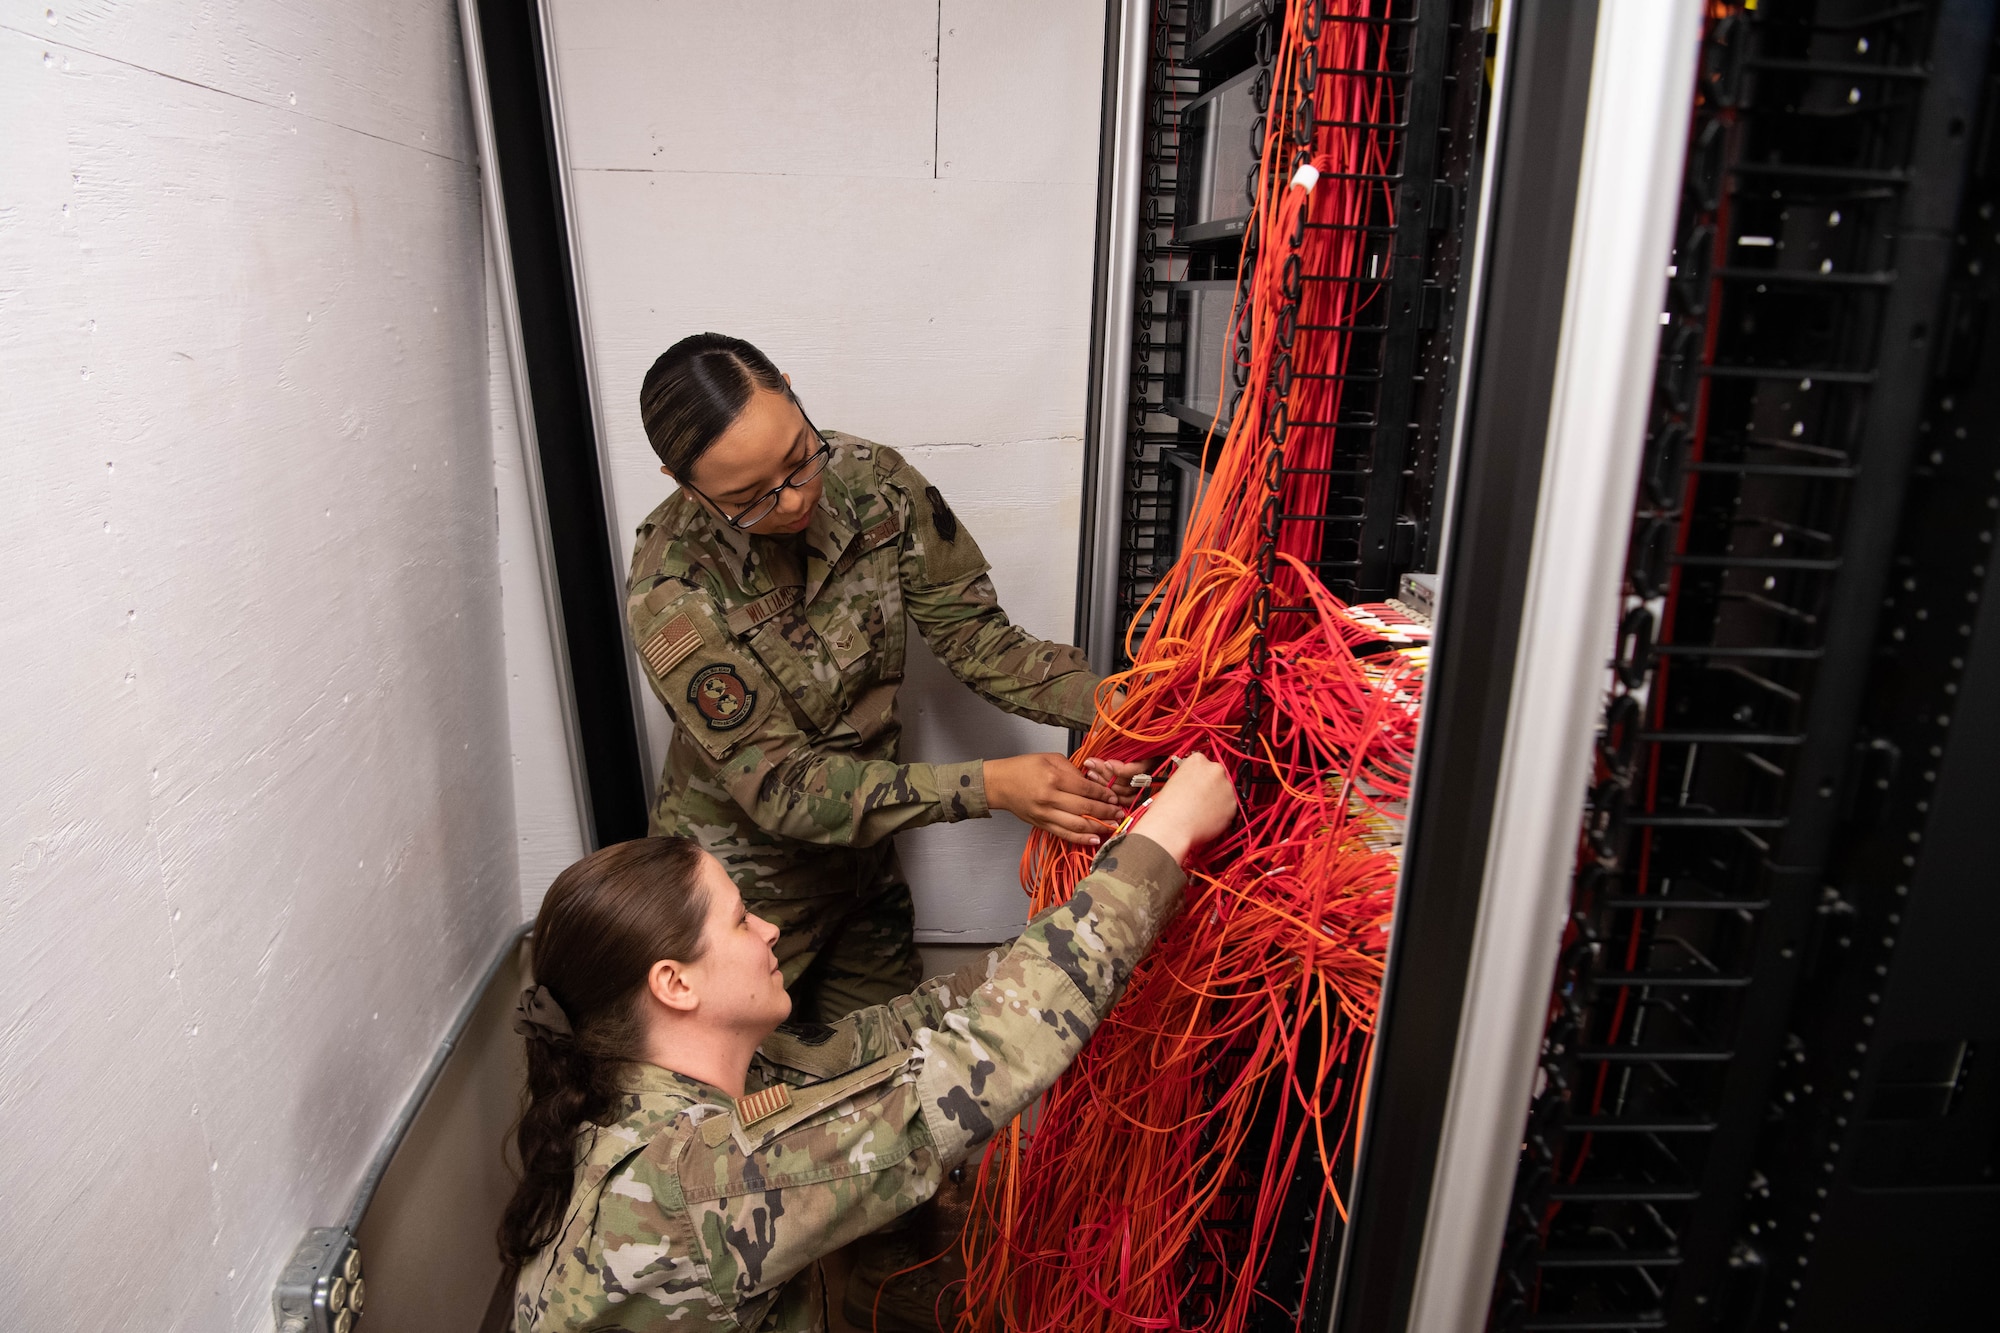 Airman 1st Class Sofaira Williams, 608th Air Communication Squadron network systems technician (top), and Airman 1st Class Victoria Montville, 608th ACOMS client systems technician (bottom), trace out connections in the ACOMS patch closet. The closet is used for troubleshooting network connectivity for users’ SIPR access. (U.S. Air Force photo by Staff Sgt. Bria Hughes)